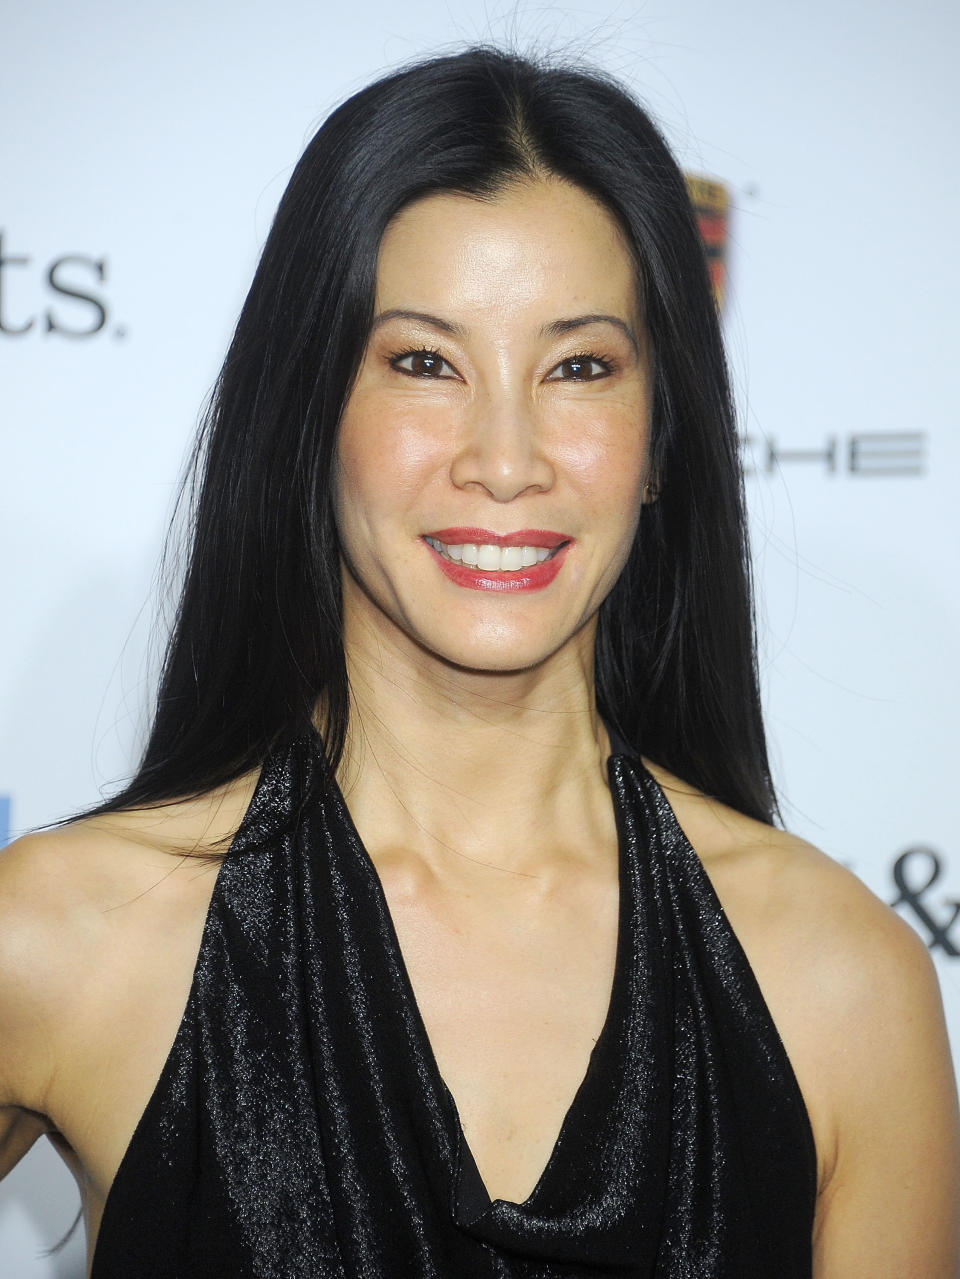 <a href="http://www.people.com/people/article/0,,20448253,00.html">During a 2010 episode of "The View,"</a> Lisa Ling spoke about her&nbsp;first pregnancy, which ended in miscarriage.&nbsp;"I felt more like a failure than I'd felt in a very long time," she said.&nbsp;<br /><br />"We actually [hadn't] been trying that long," she added. "I don't know that I took it as seriously as I should have because it happened so fast. But then when I heard the doctor say there was no heartbeat it was like bam, like a knife through the heart."